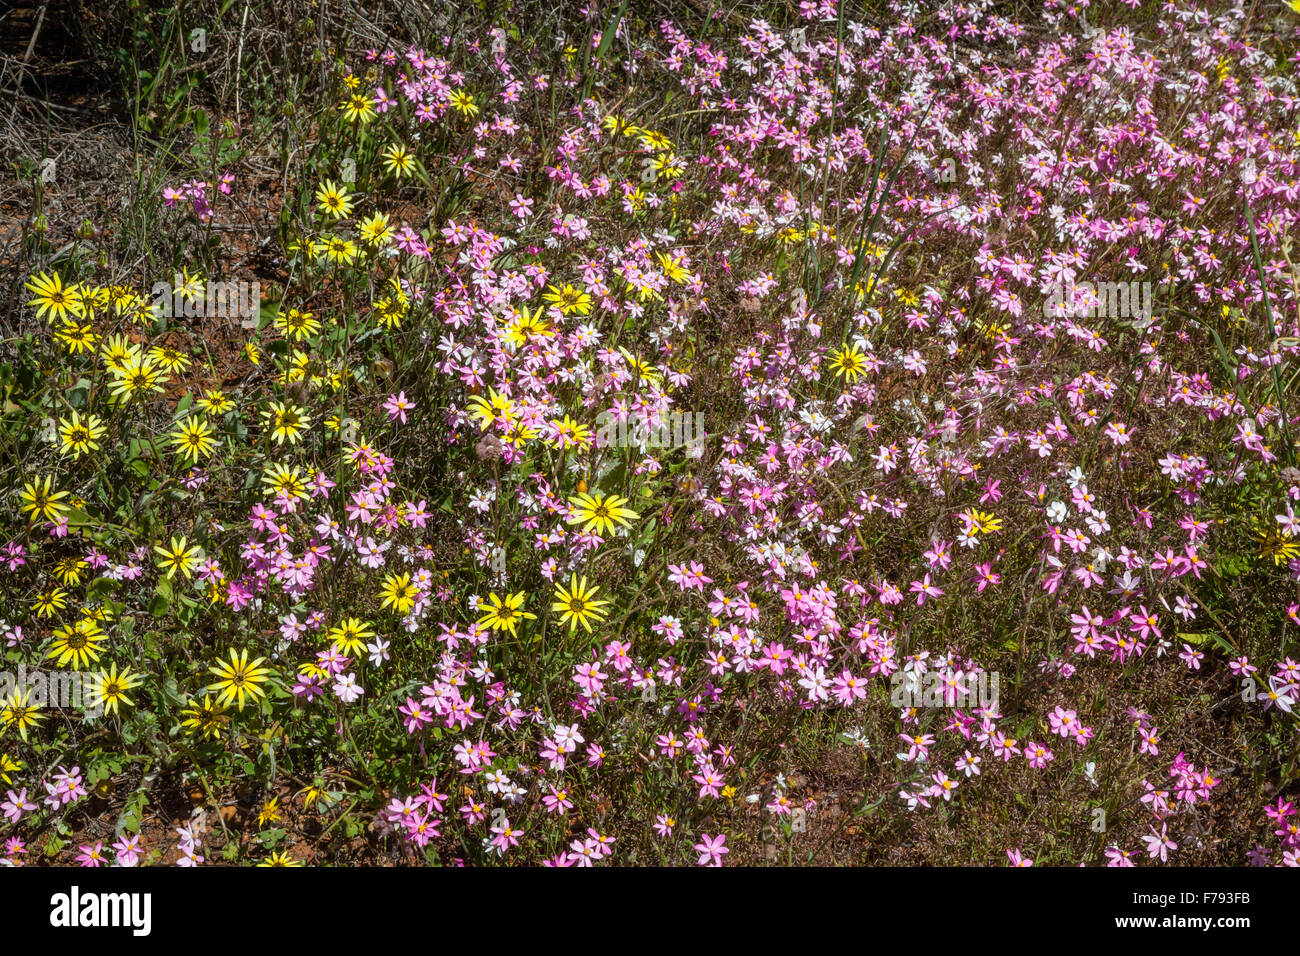 Australia, Western Australia, Mid West, Wildflower Way, spring wildflowers at the Mullewa-Wubin Road, Schoenias and Cape Weed Stock Photo